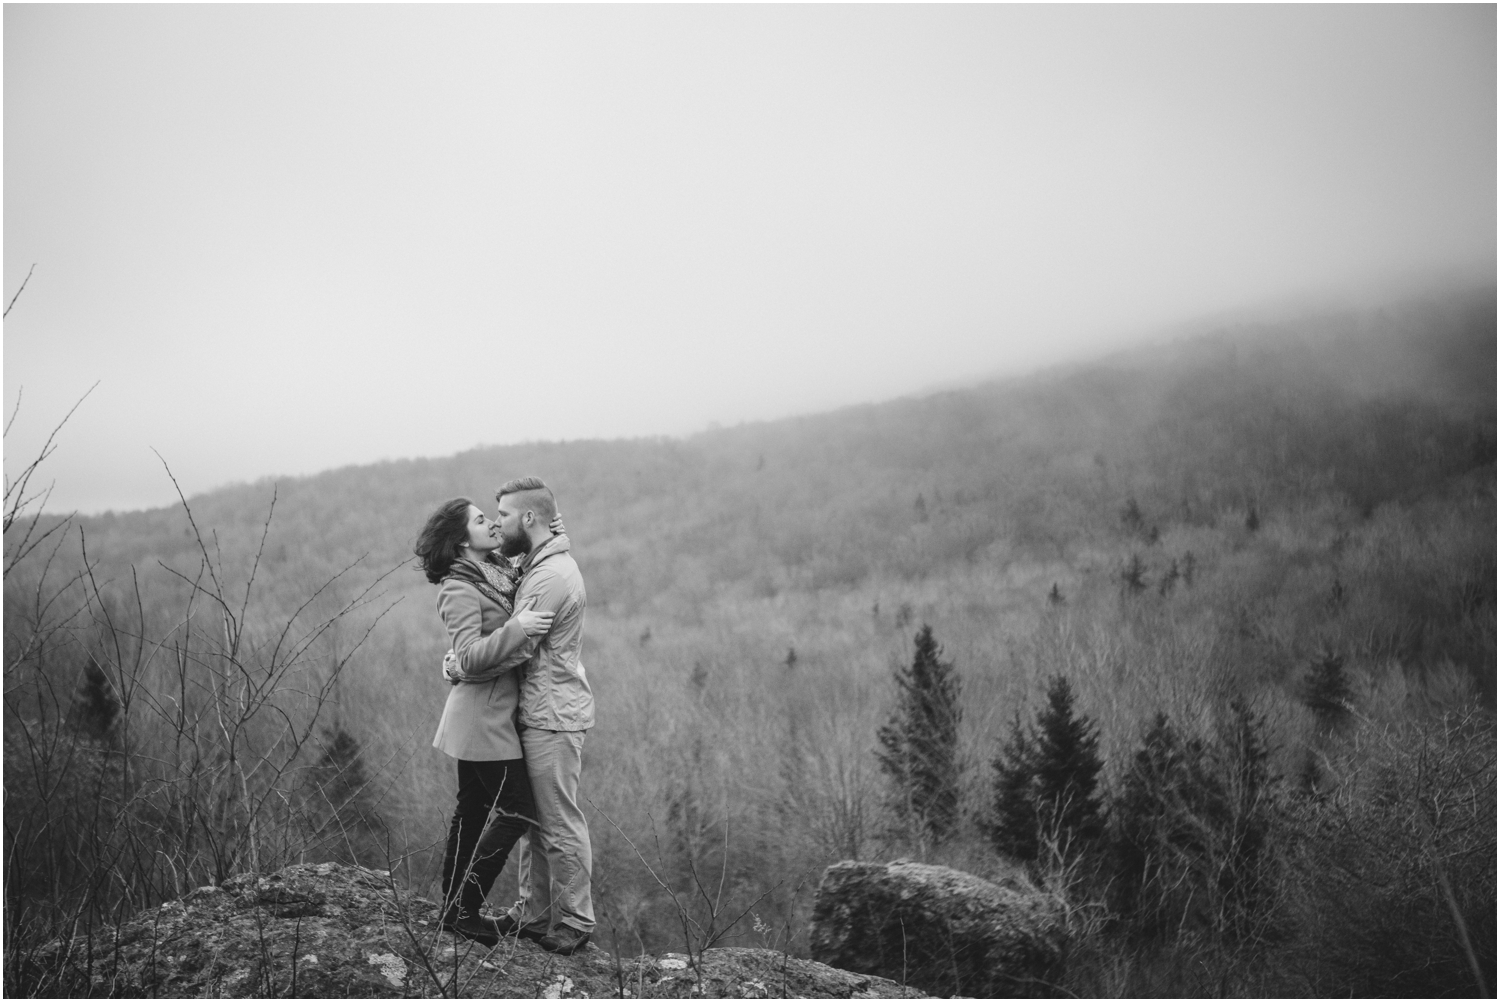 katy-sergent-photography-grayson-highlands-engagement-session-mouth-of-wilson-virginia-damascus-appalachian-trail-tennessee-wedding-elopement_0022.jpg